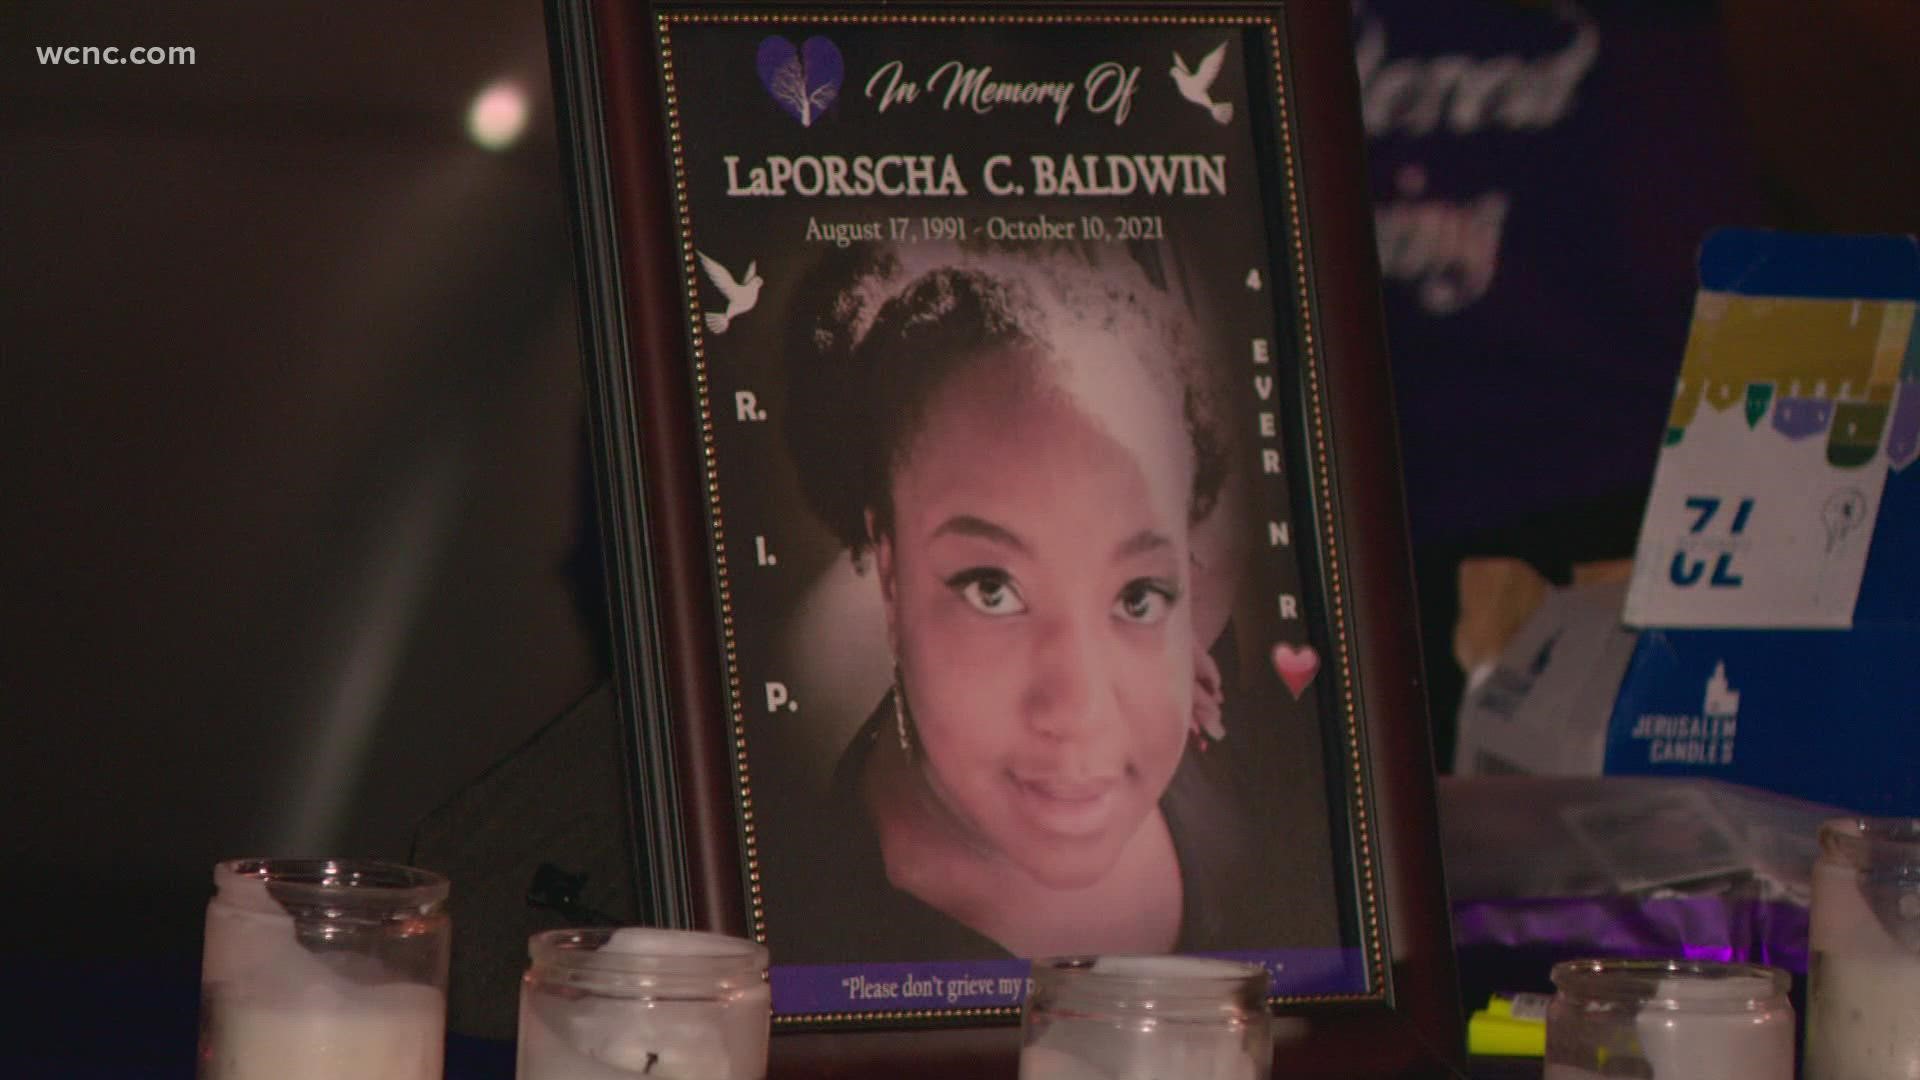 Family and friends came together Thursday for a vigil at the Alleghany Street Park to honor her life.
She was just 30-years-old.